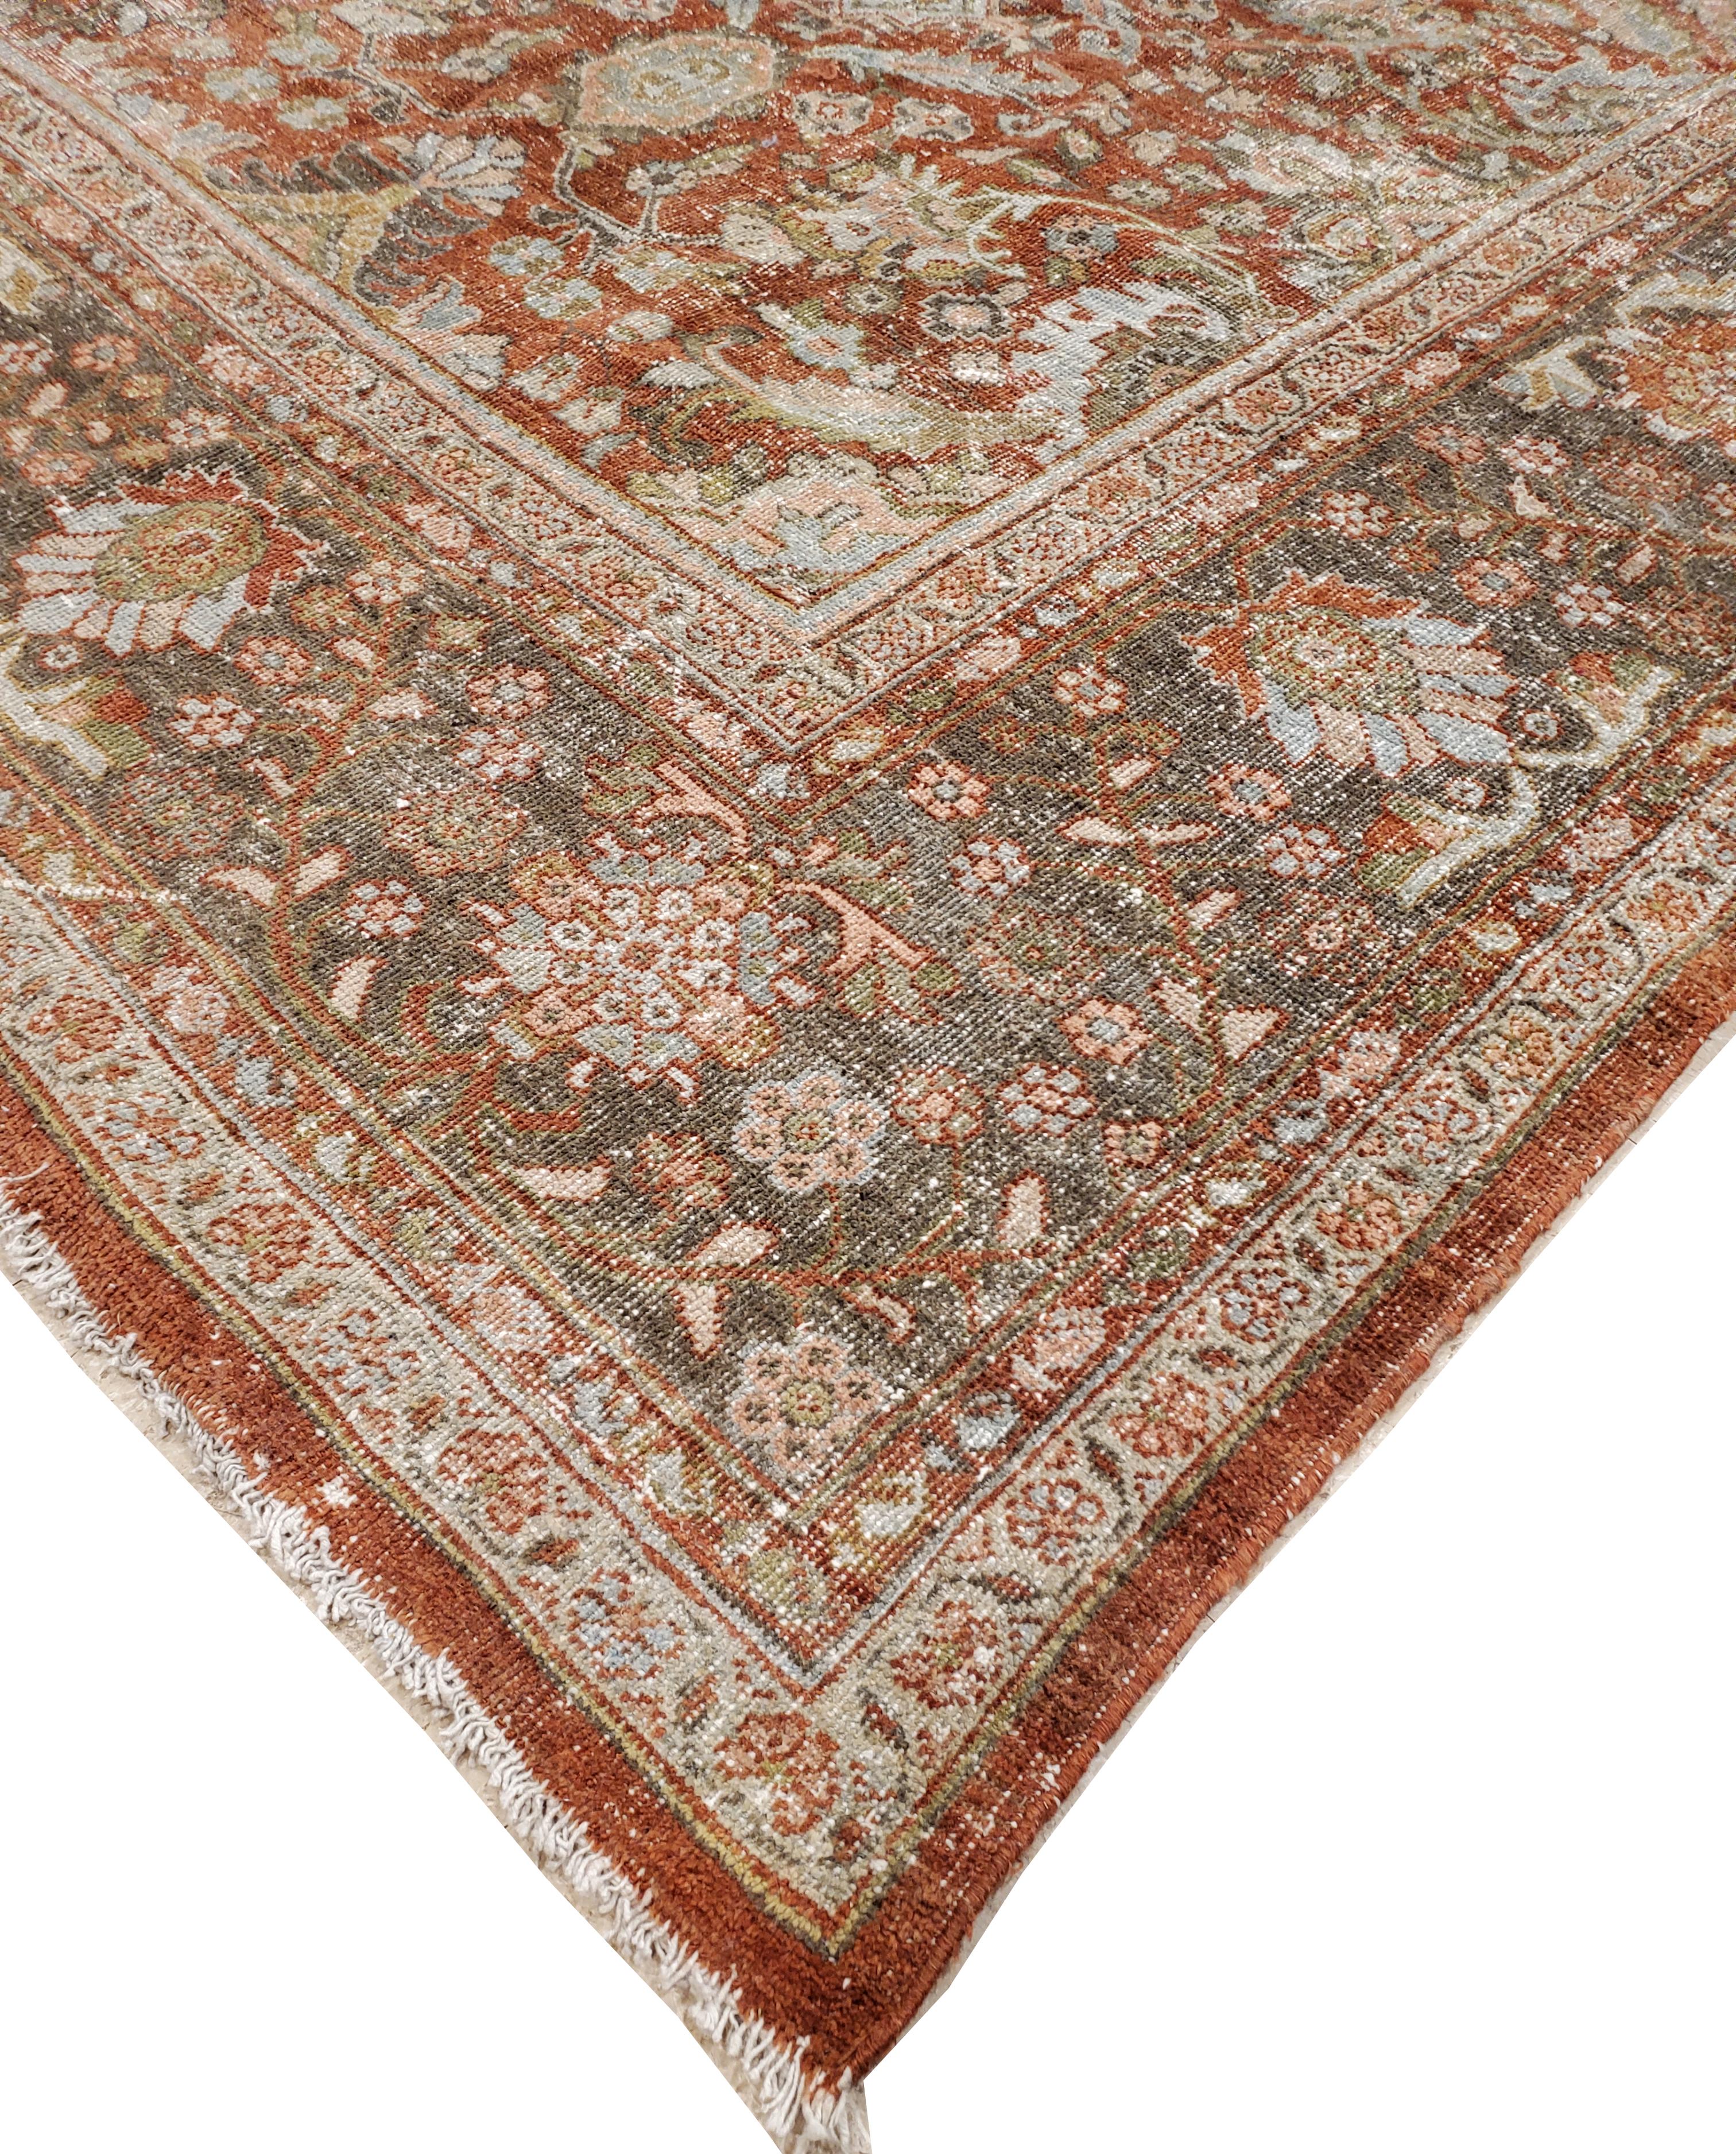 Antique Persian Sultanabad Carpet, Handmade Oriental Rug, Light Blue, Rust, Gray For Sale 1